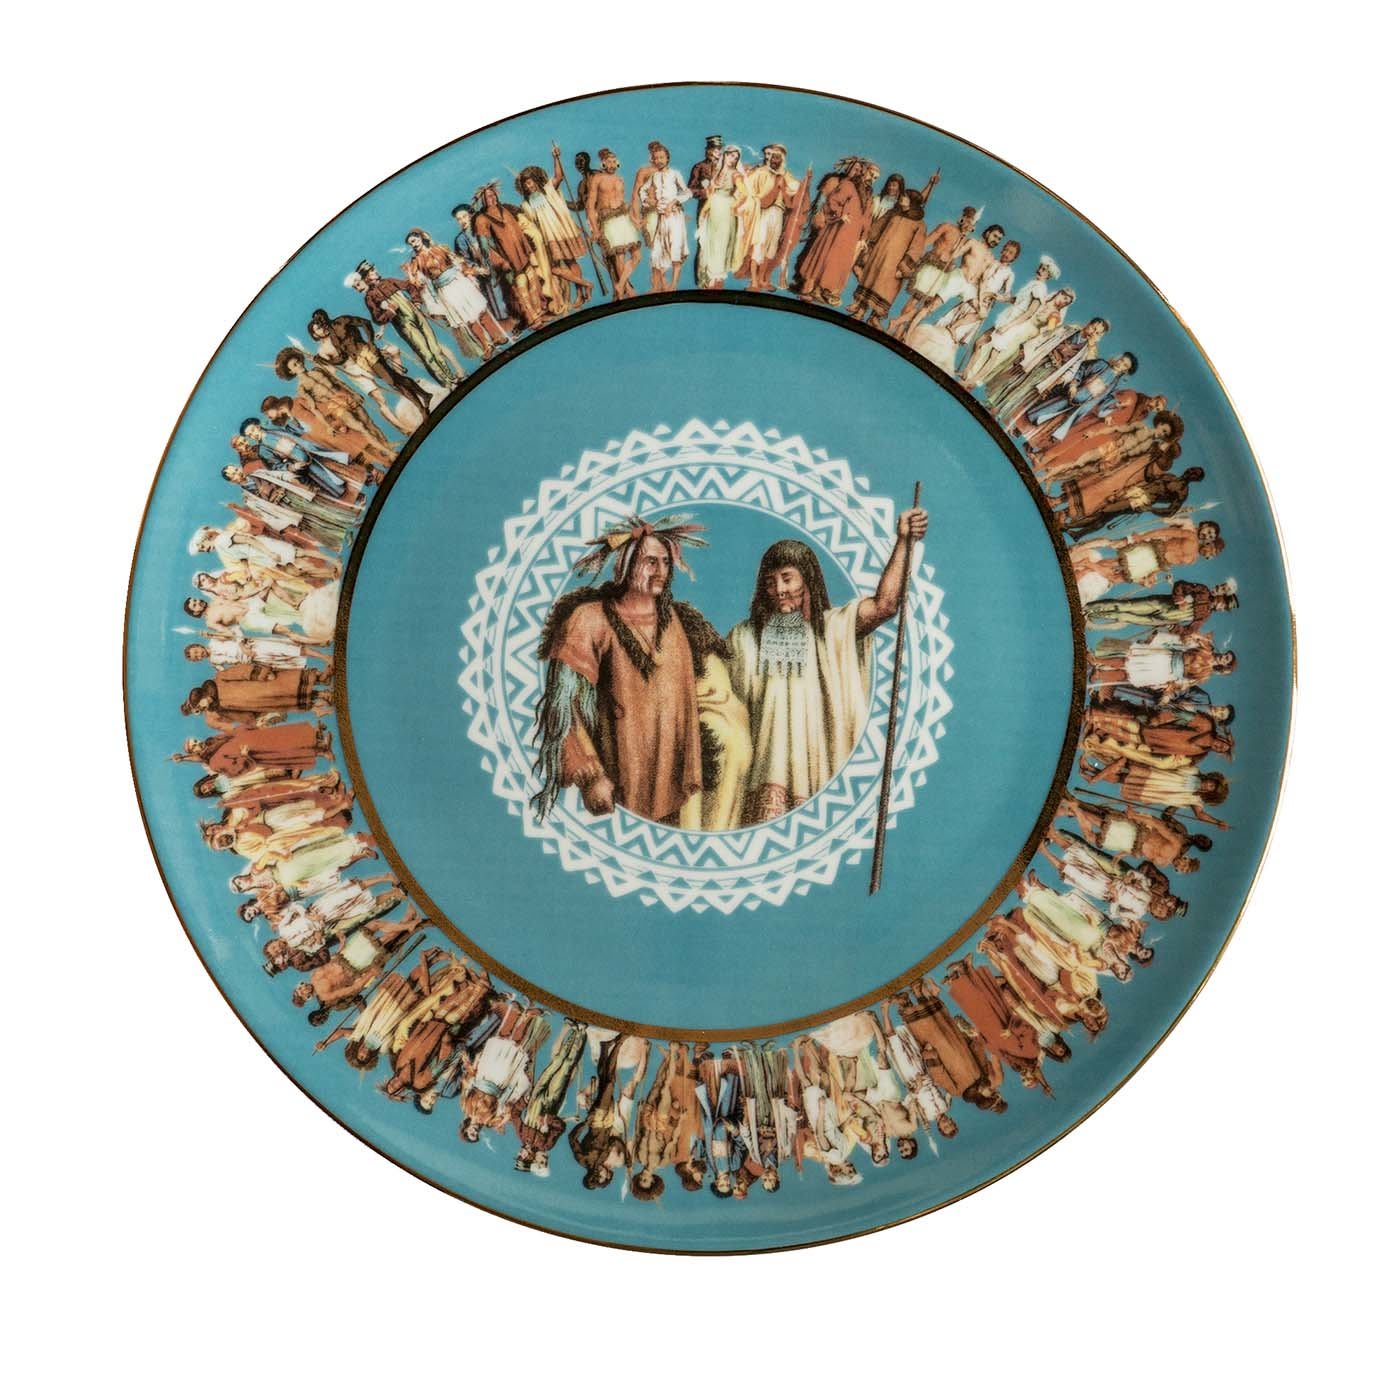 Human Being Dinner Plate N. 2 - Grand Tour by Vito Nesta